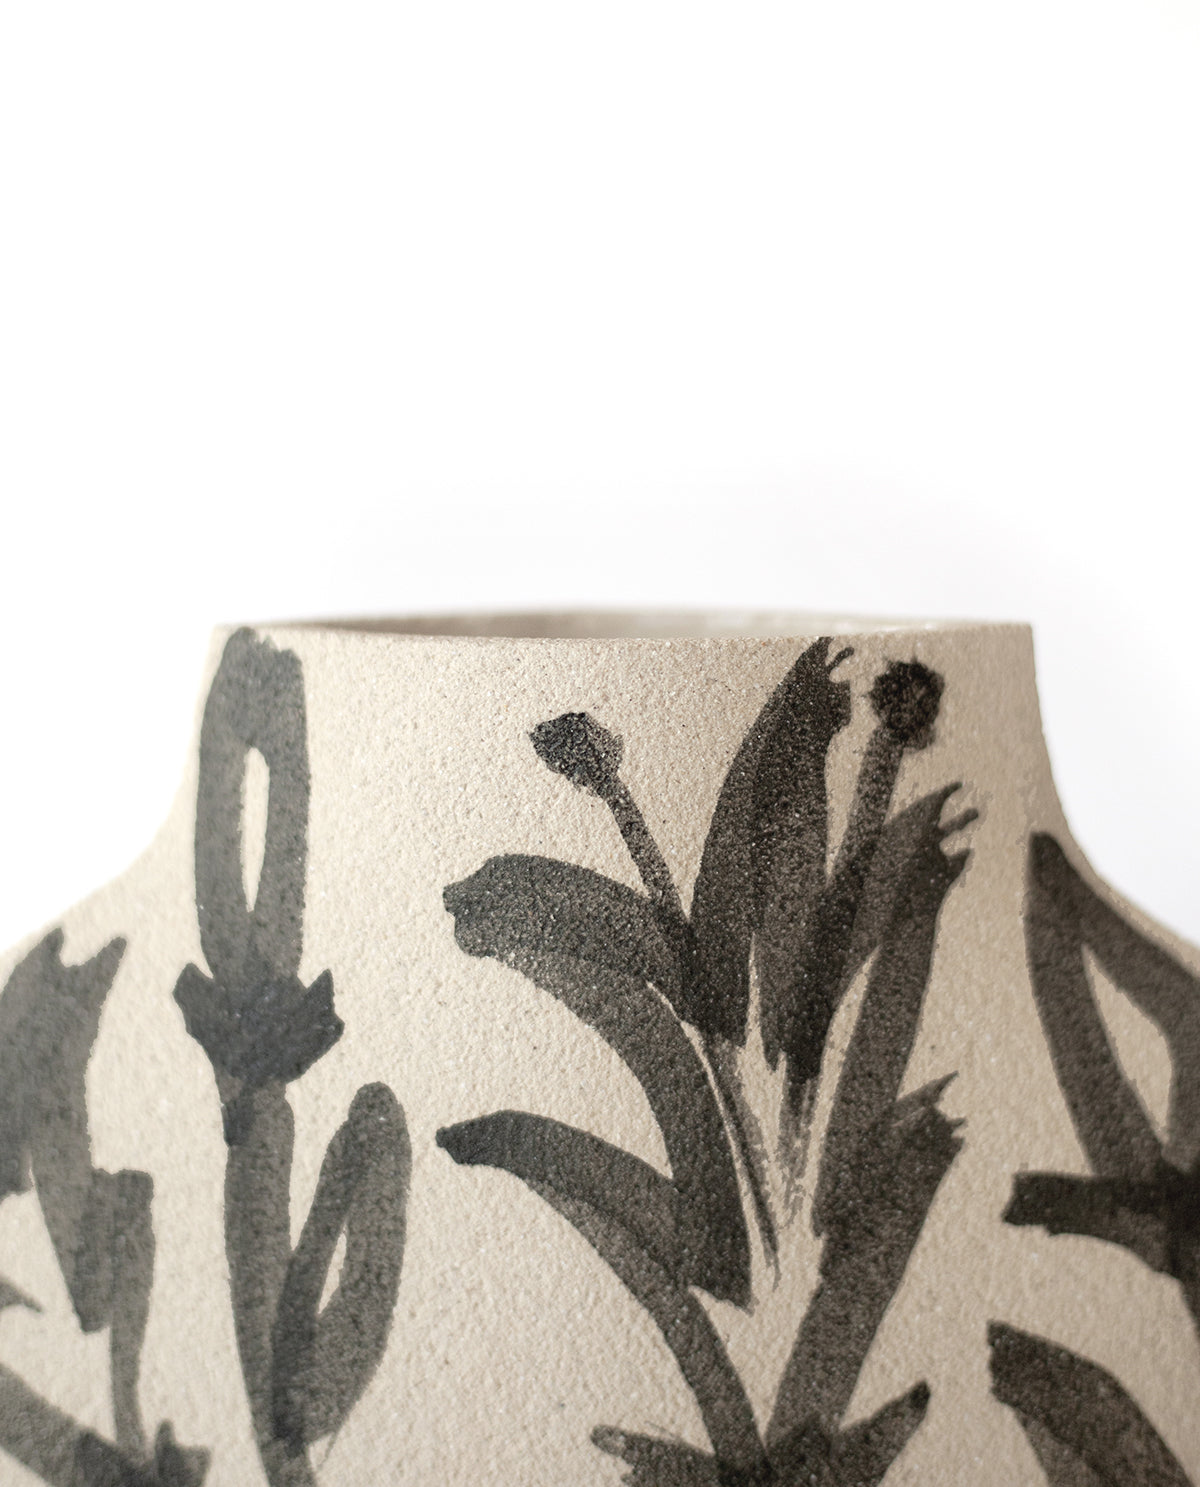 Hand-painted floral vase by INI CERAMIQUE with lilies patterns and textured finish